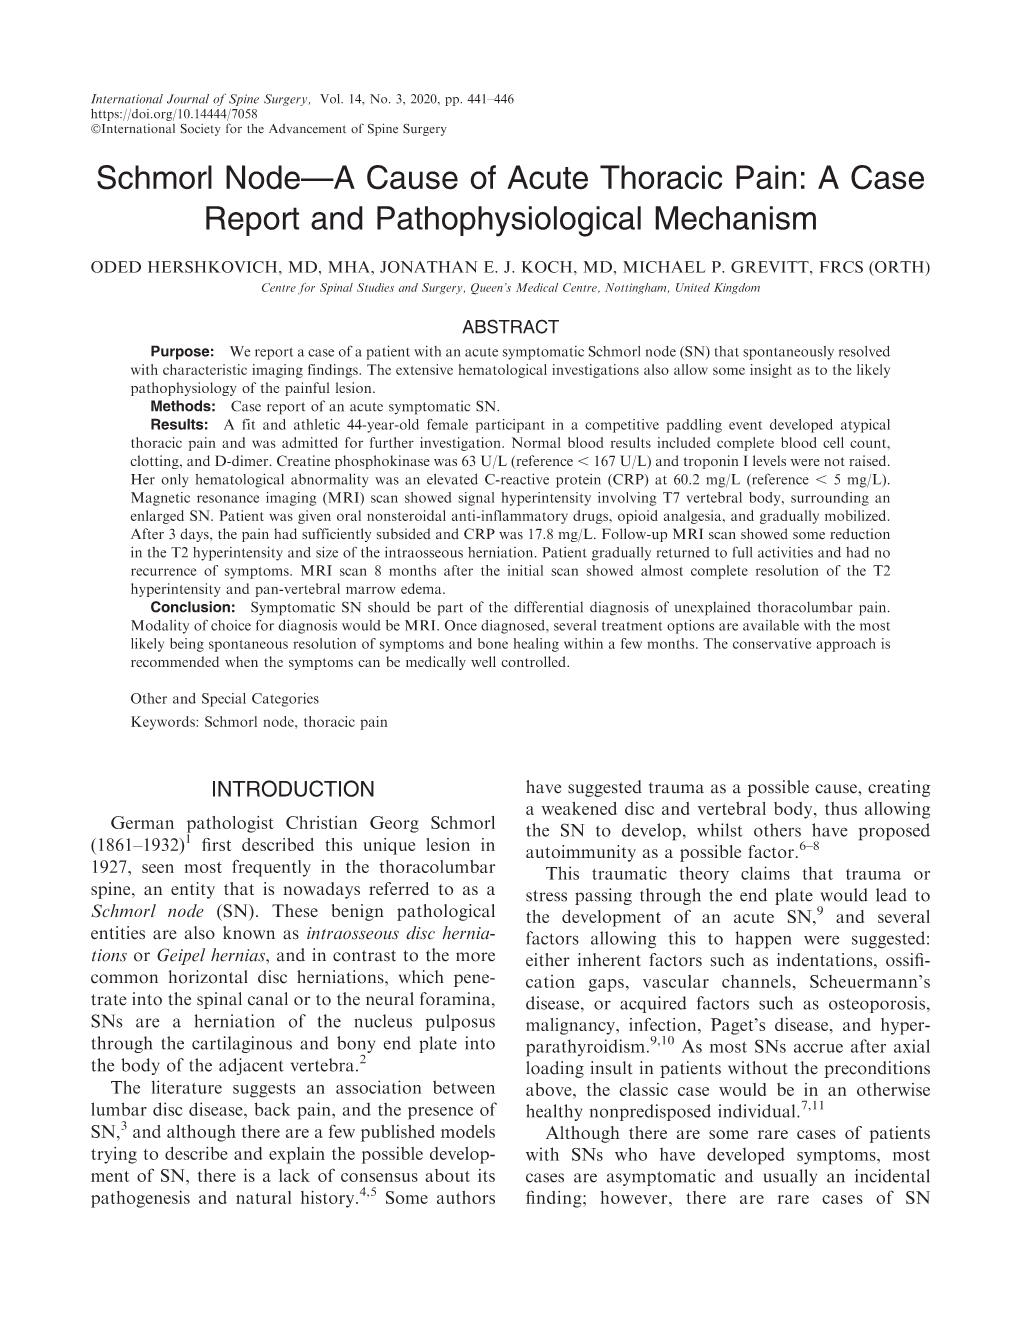 Schmorl Node—A Cause of Acute Thoracic Pain: a Case Report and Pathophysiological Mechanism